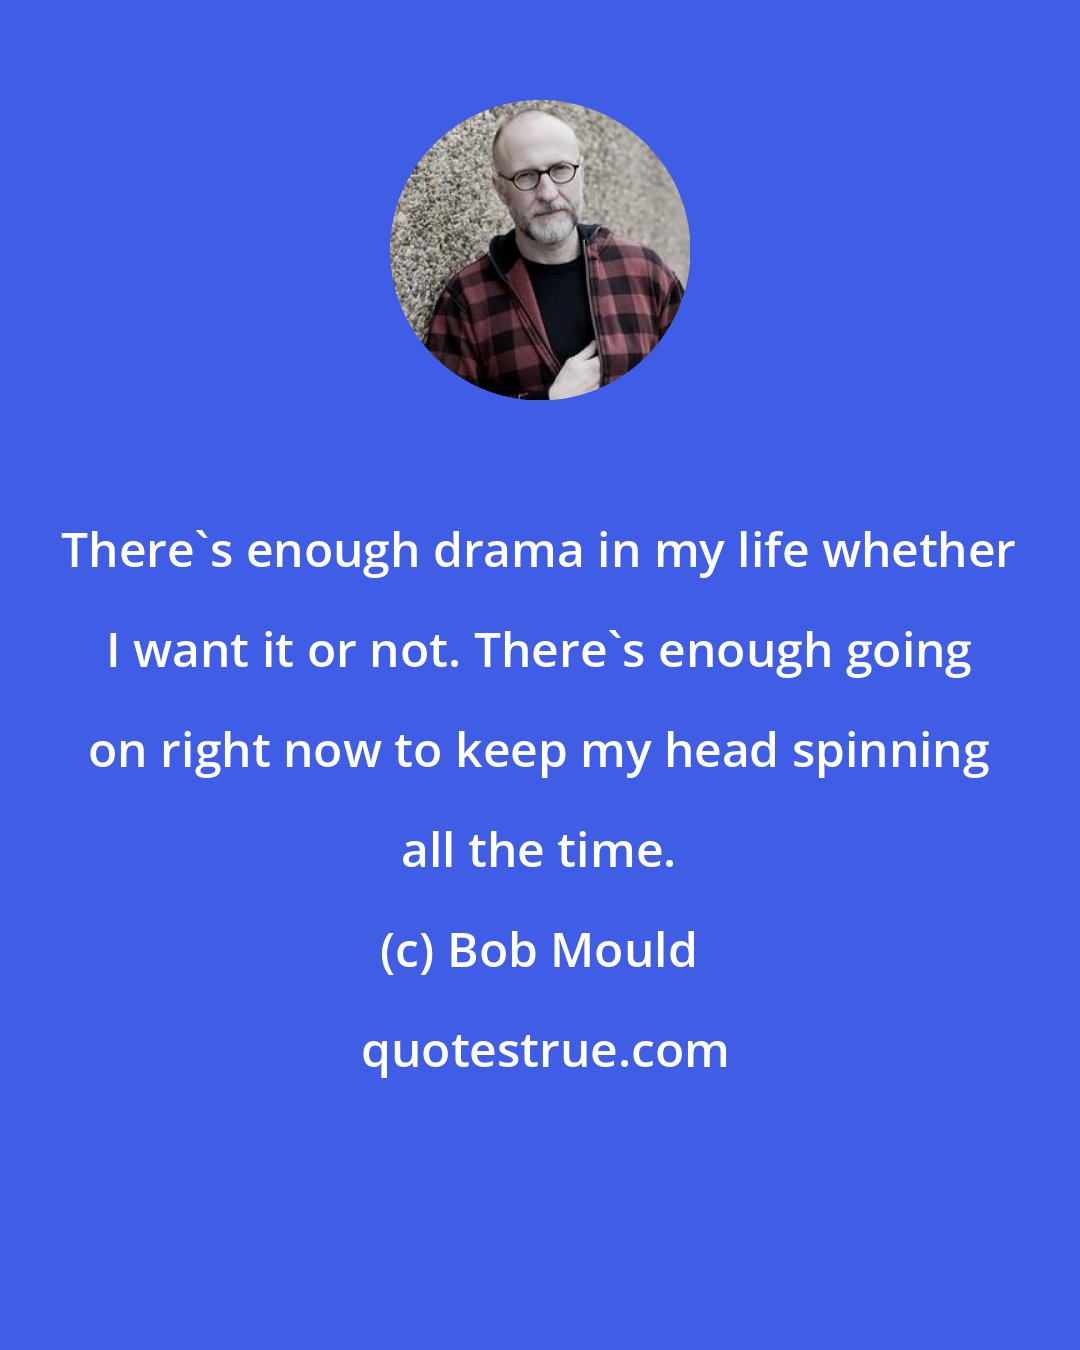 Bob Mould: There's enough drama in my life whether I want it or not. There's enough going on right now to keep my head spinning all the time.